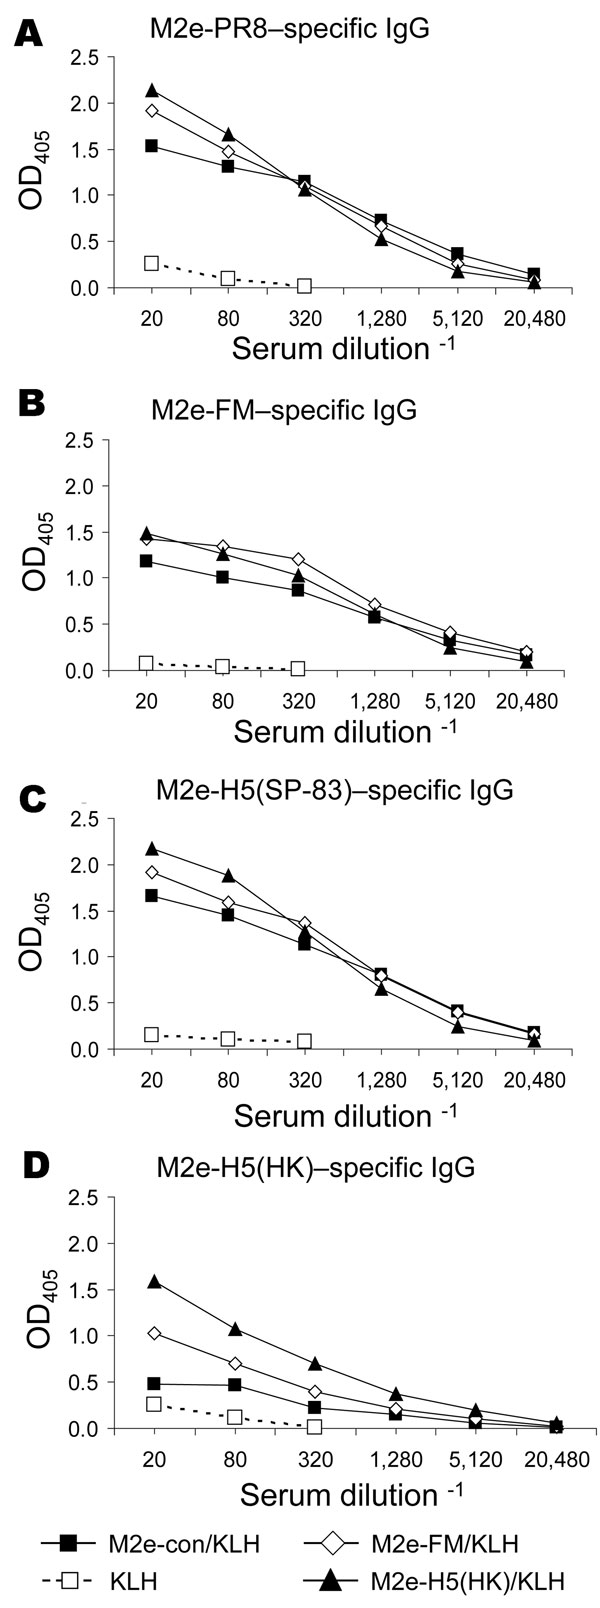 Results of matrix protein 2 (M2)e–keyhole limpet hemocyanin (KLH) vaccination, showing induction of cross-reactive antibody responses. Mice (7–9 per group) were immunized intraperitoneally with KLH or M2e peptides conjugated to KLH (M2e-con/KLH, M2e-FM/KLH, or M2e-H5(HK)/KLH) in complete Freund’s adjuvant. After 21 days, the mice were given an intraperitoneal booster with KLH or M2e-peptide/KLH in incomplete Freund’s adjuvant. Immune serum was collected 13 days after booster and assayed for immu